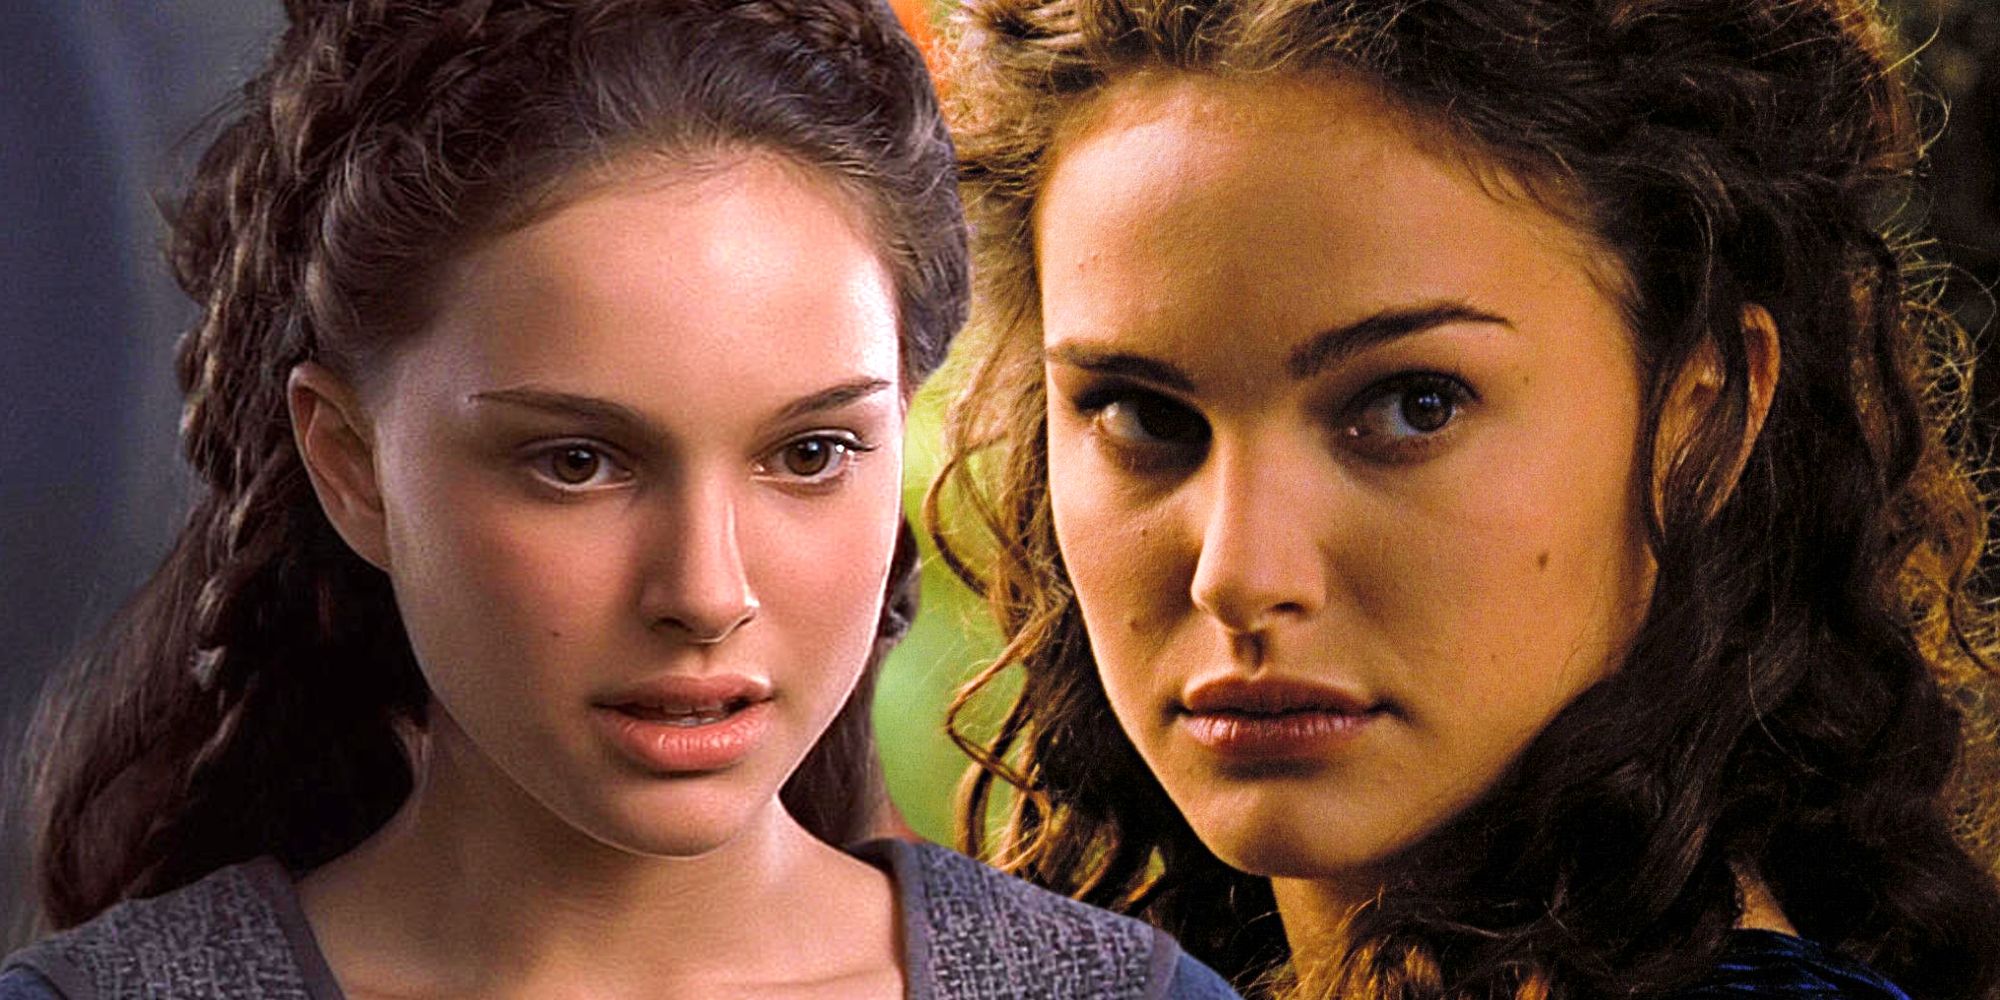 Natalie Portman as Padme in the Star Wars prequels.